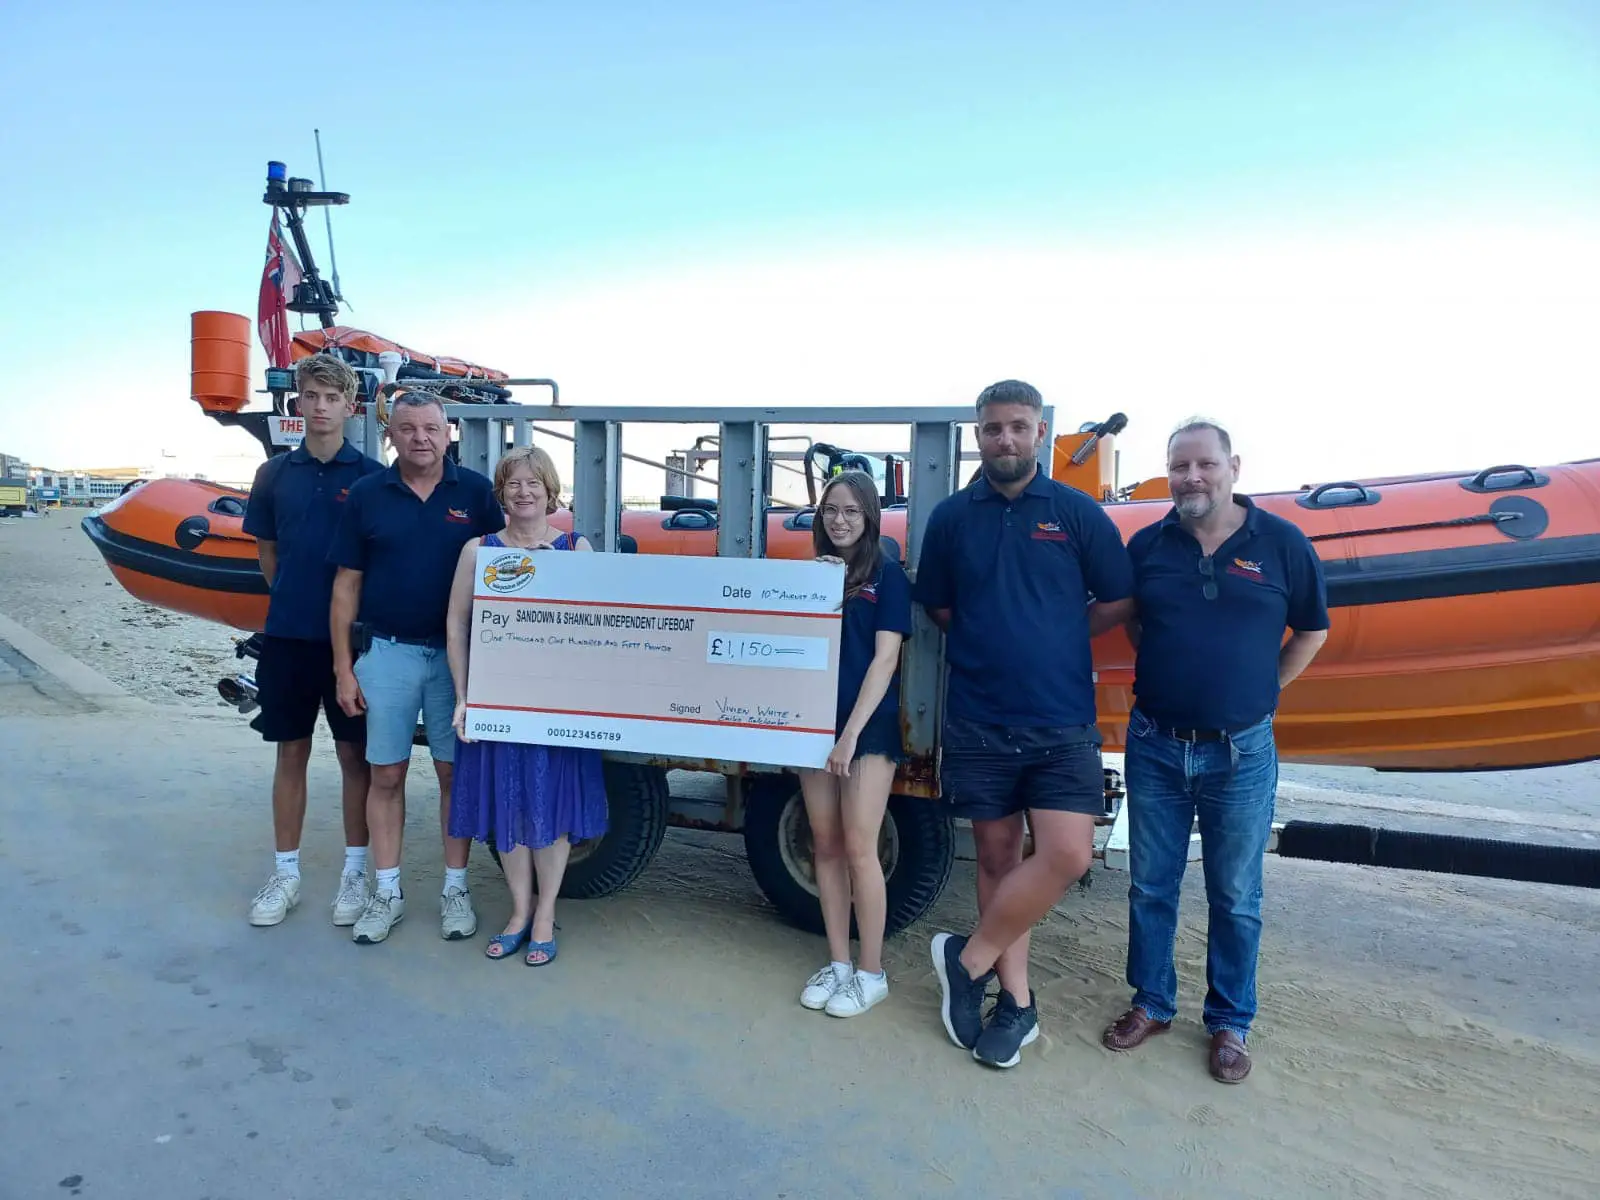 Vivien and Emilia presenting cheque to Lifeboat volunteers